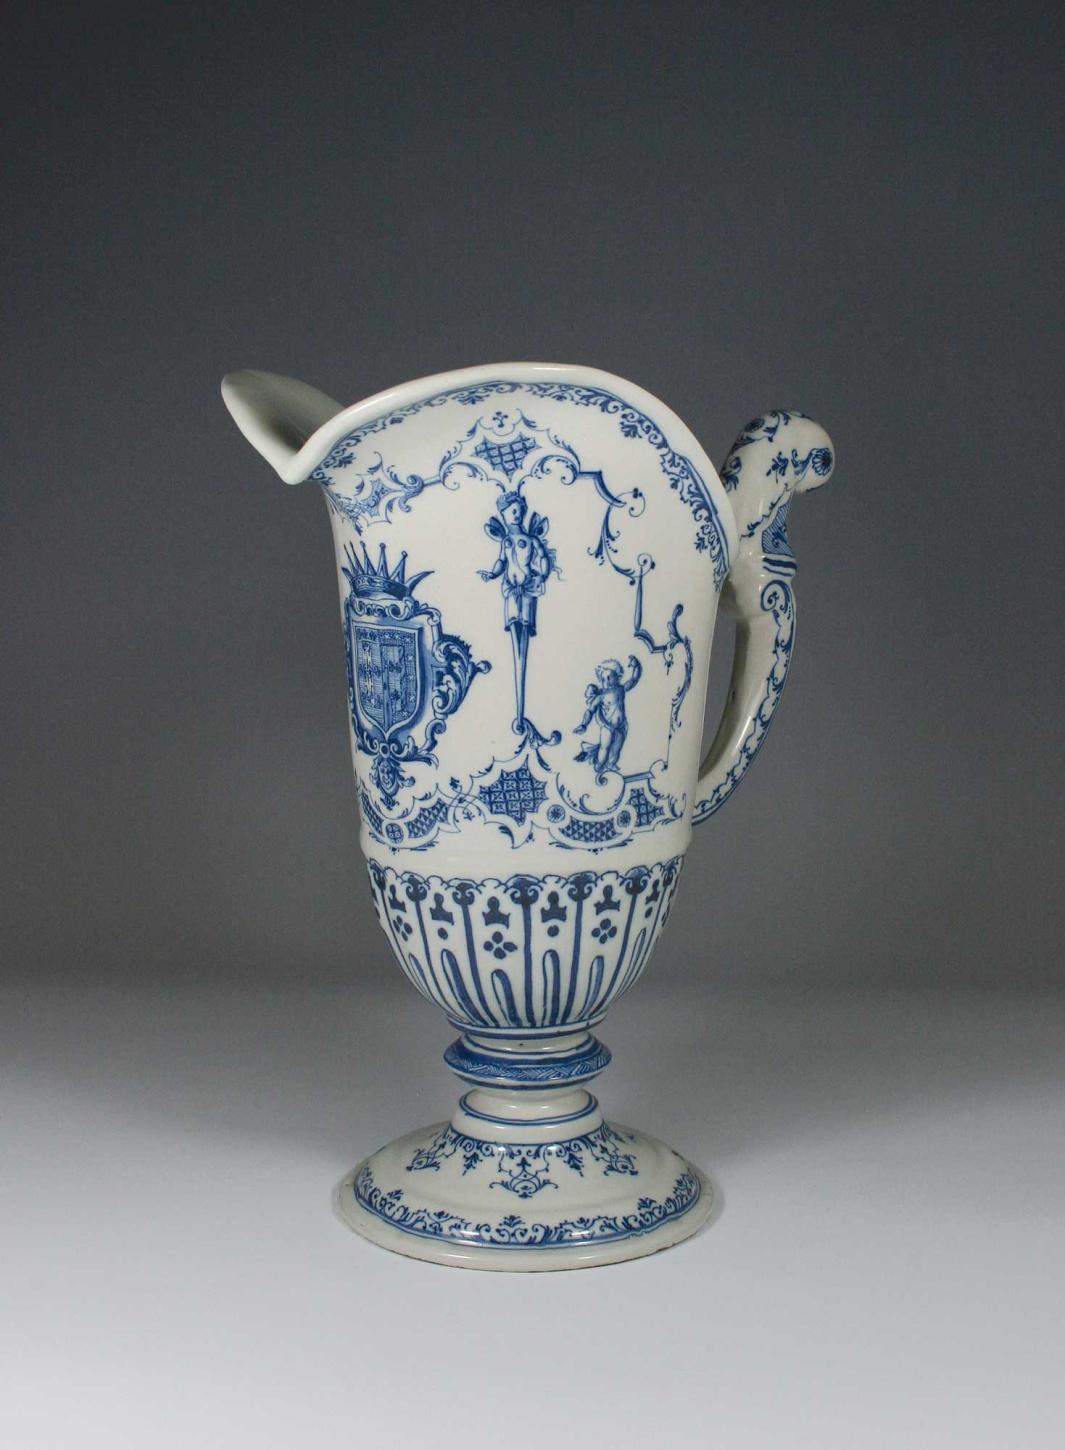 Earthenware ewer in blue and white with a coat of arms and two figures.